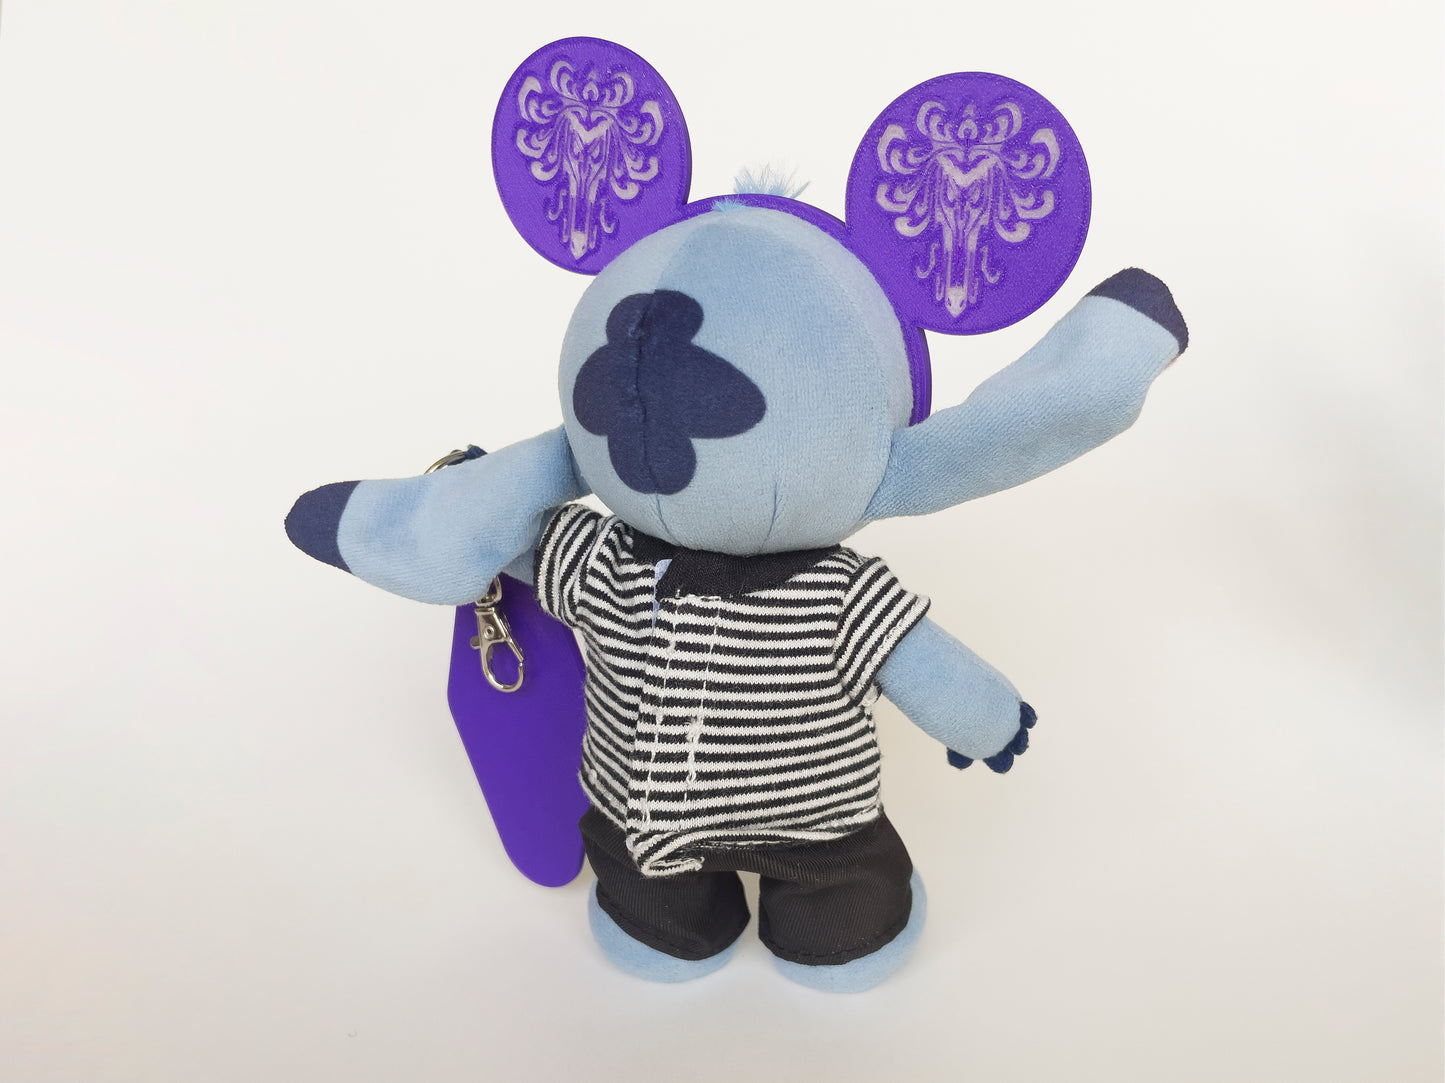 Haunted Mansion Mouse Ears & Vintage Keychain for NuiMO Plushes